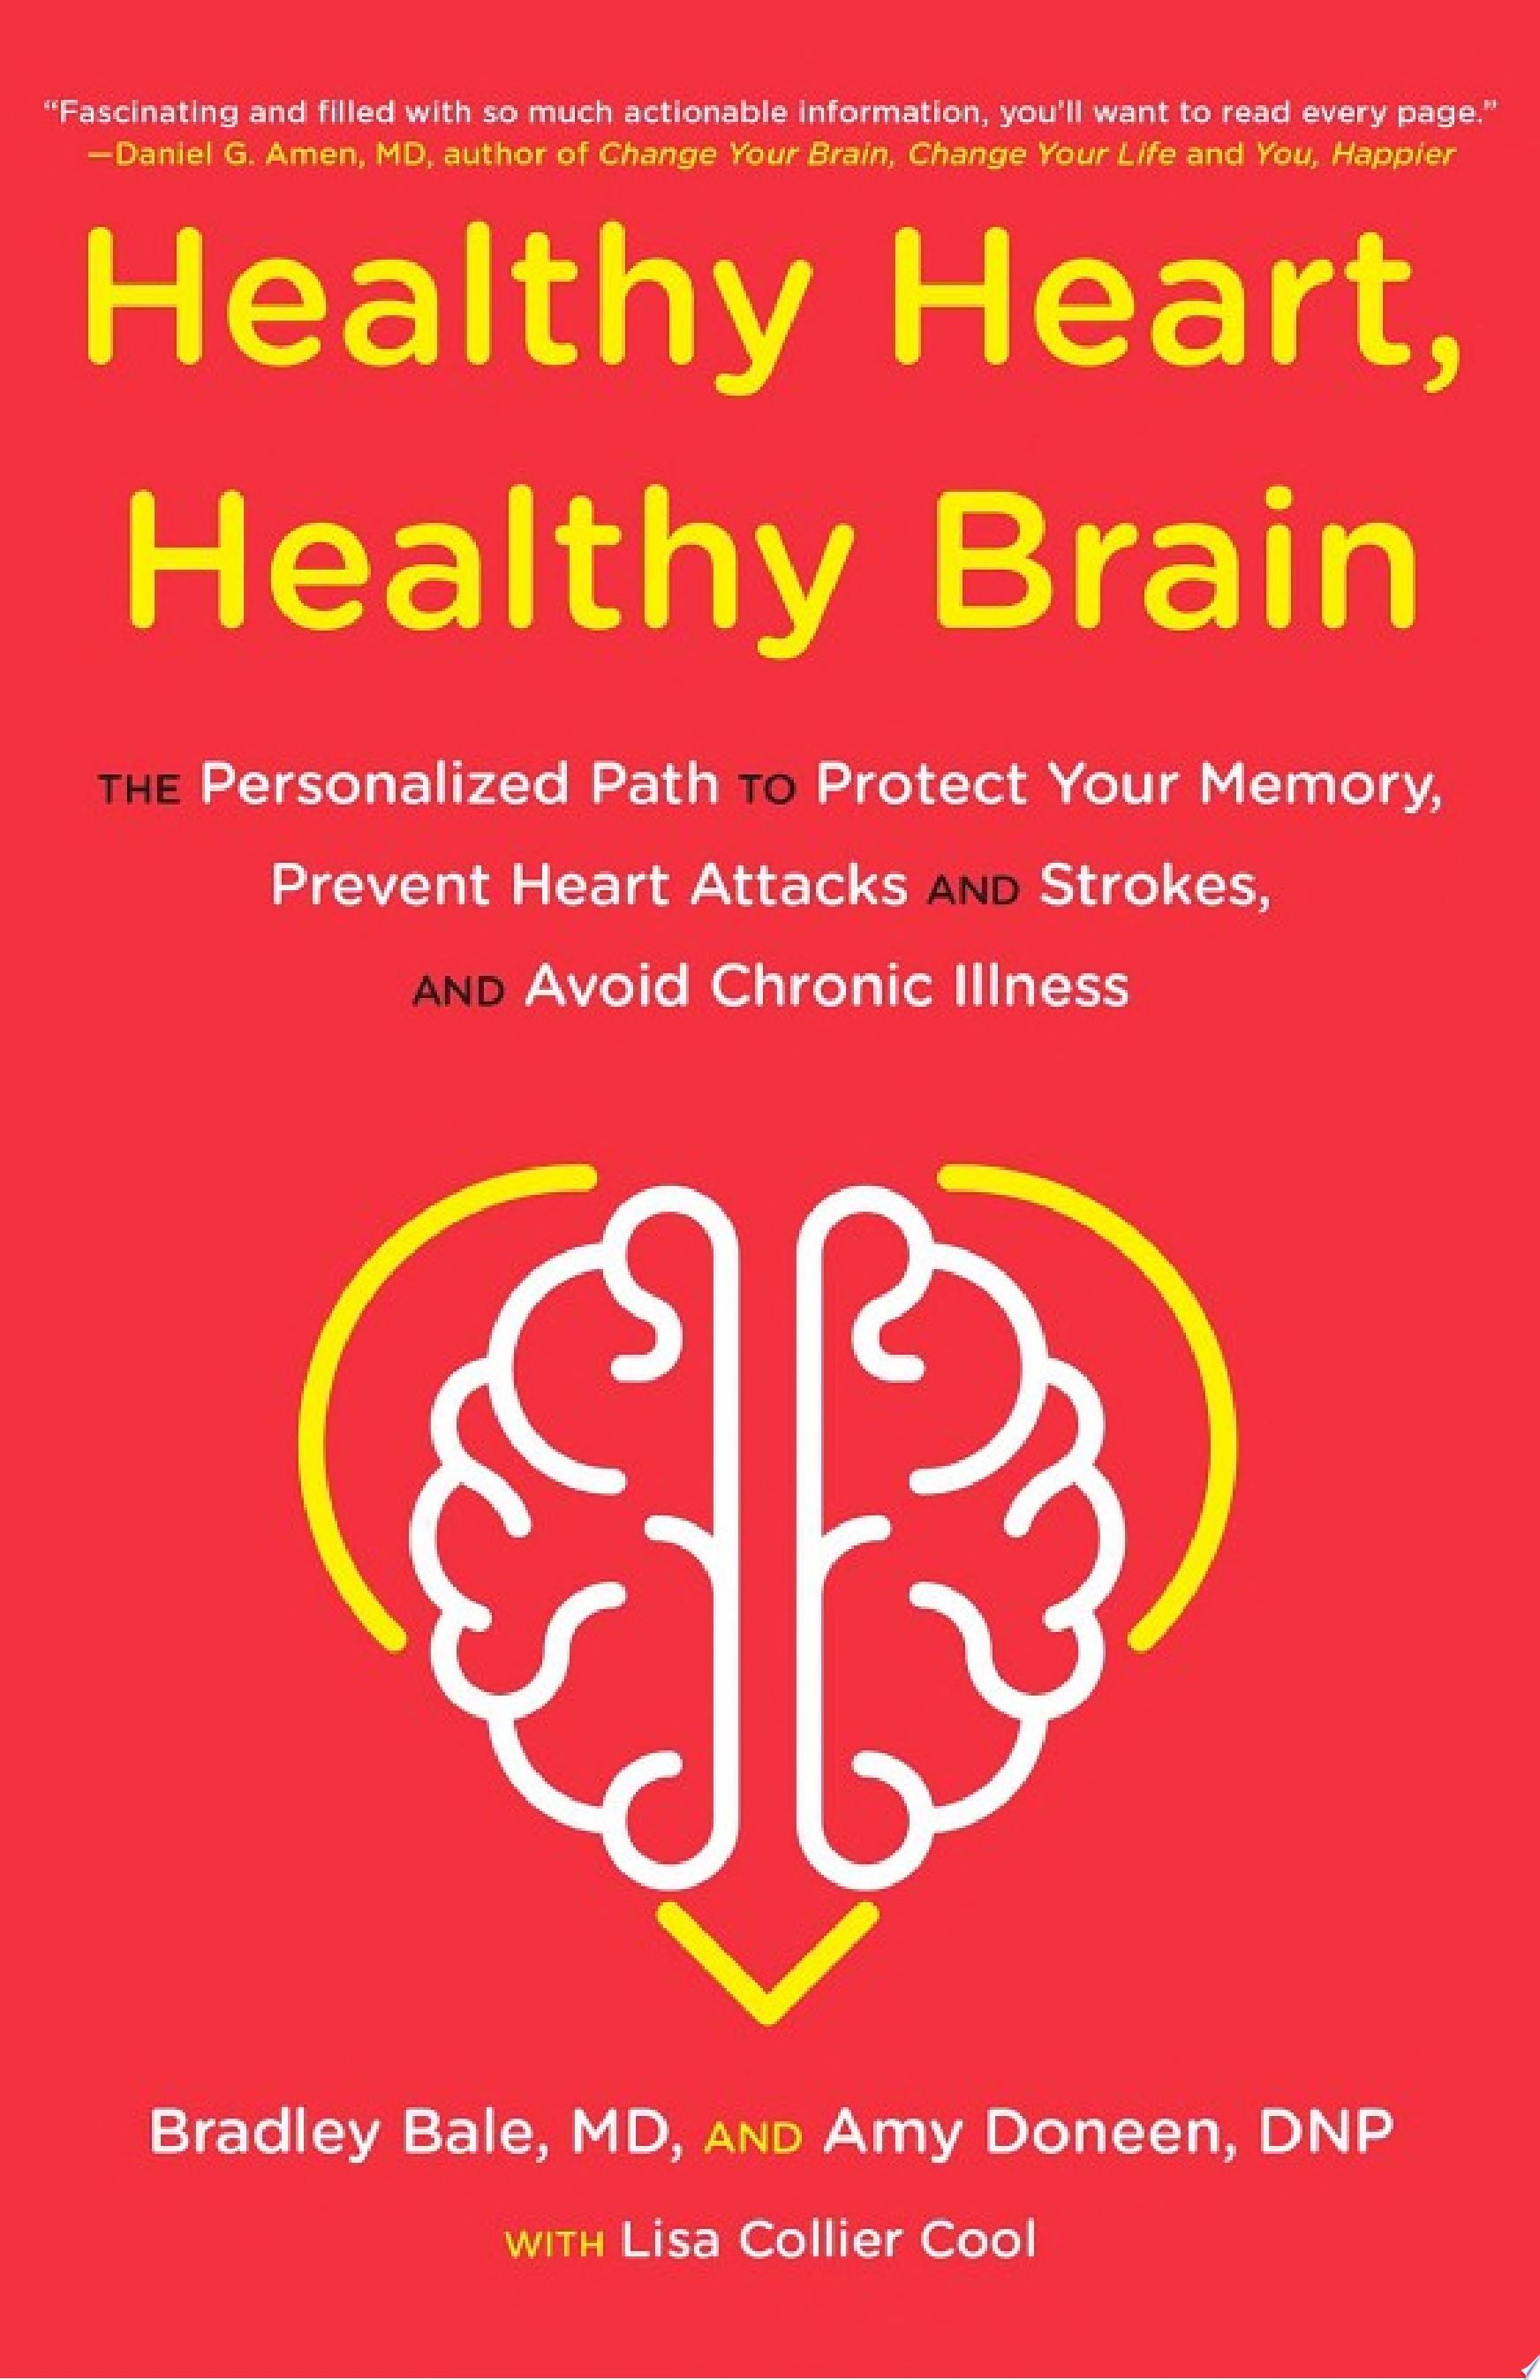 Image for "Healthy Heart, Healthy Brain"